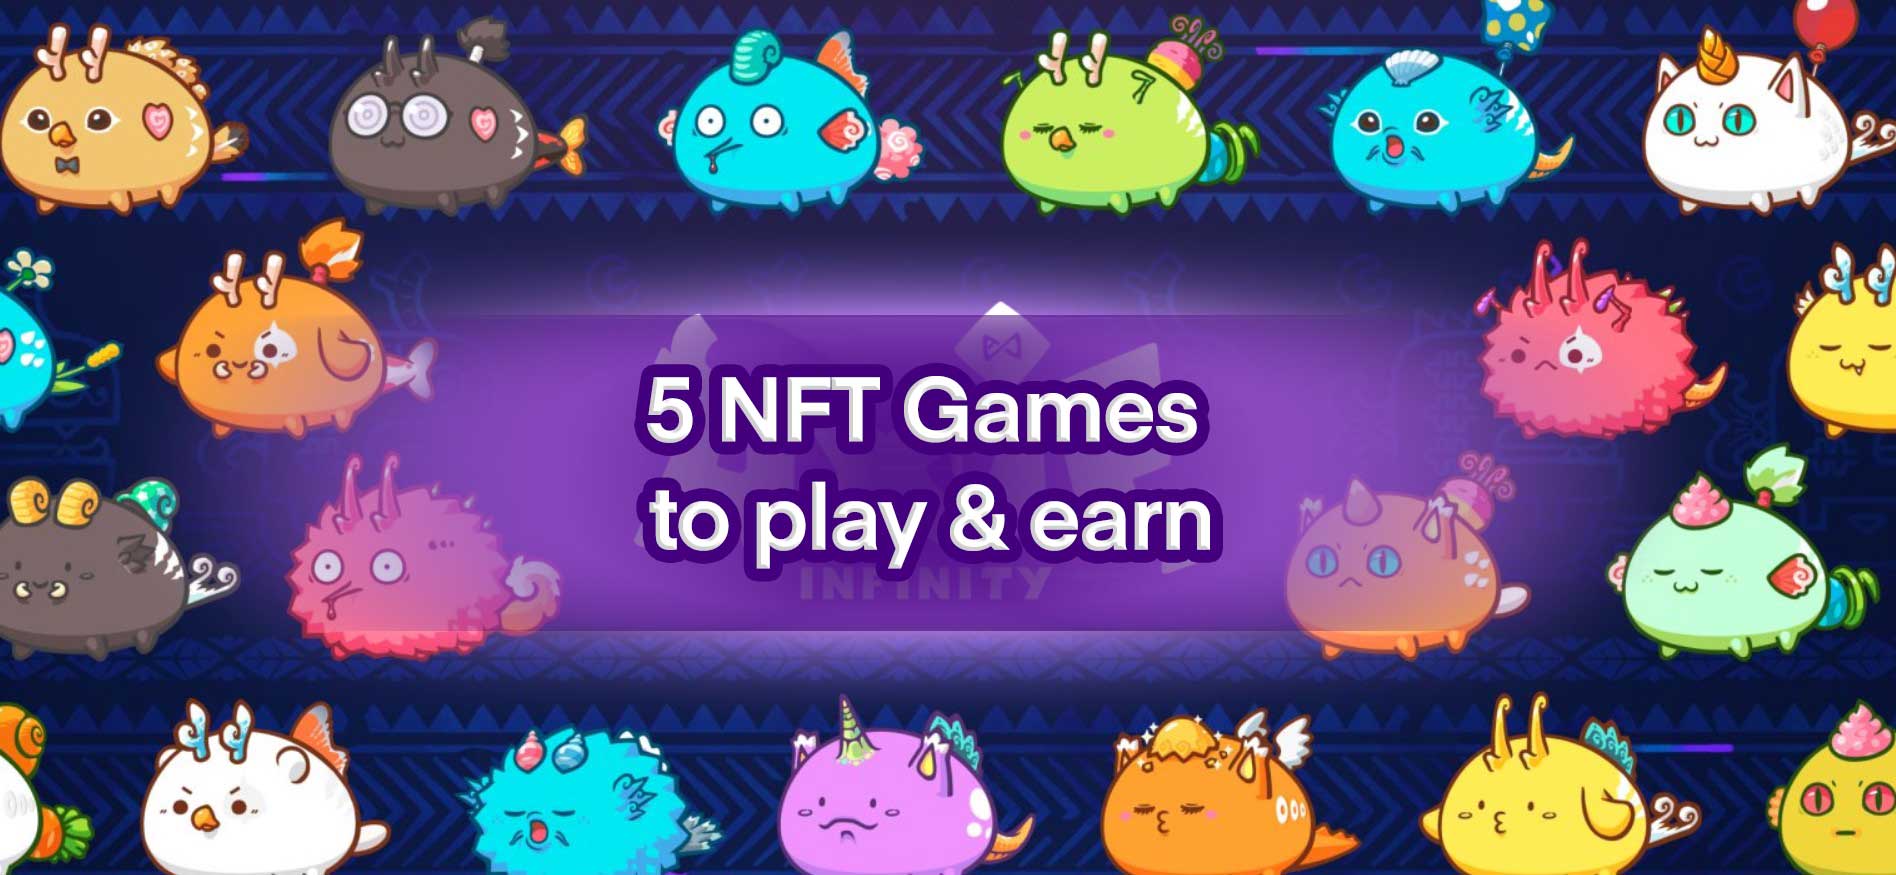 5 NFT games to play today and earn some money